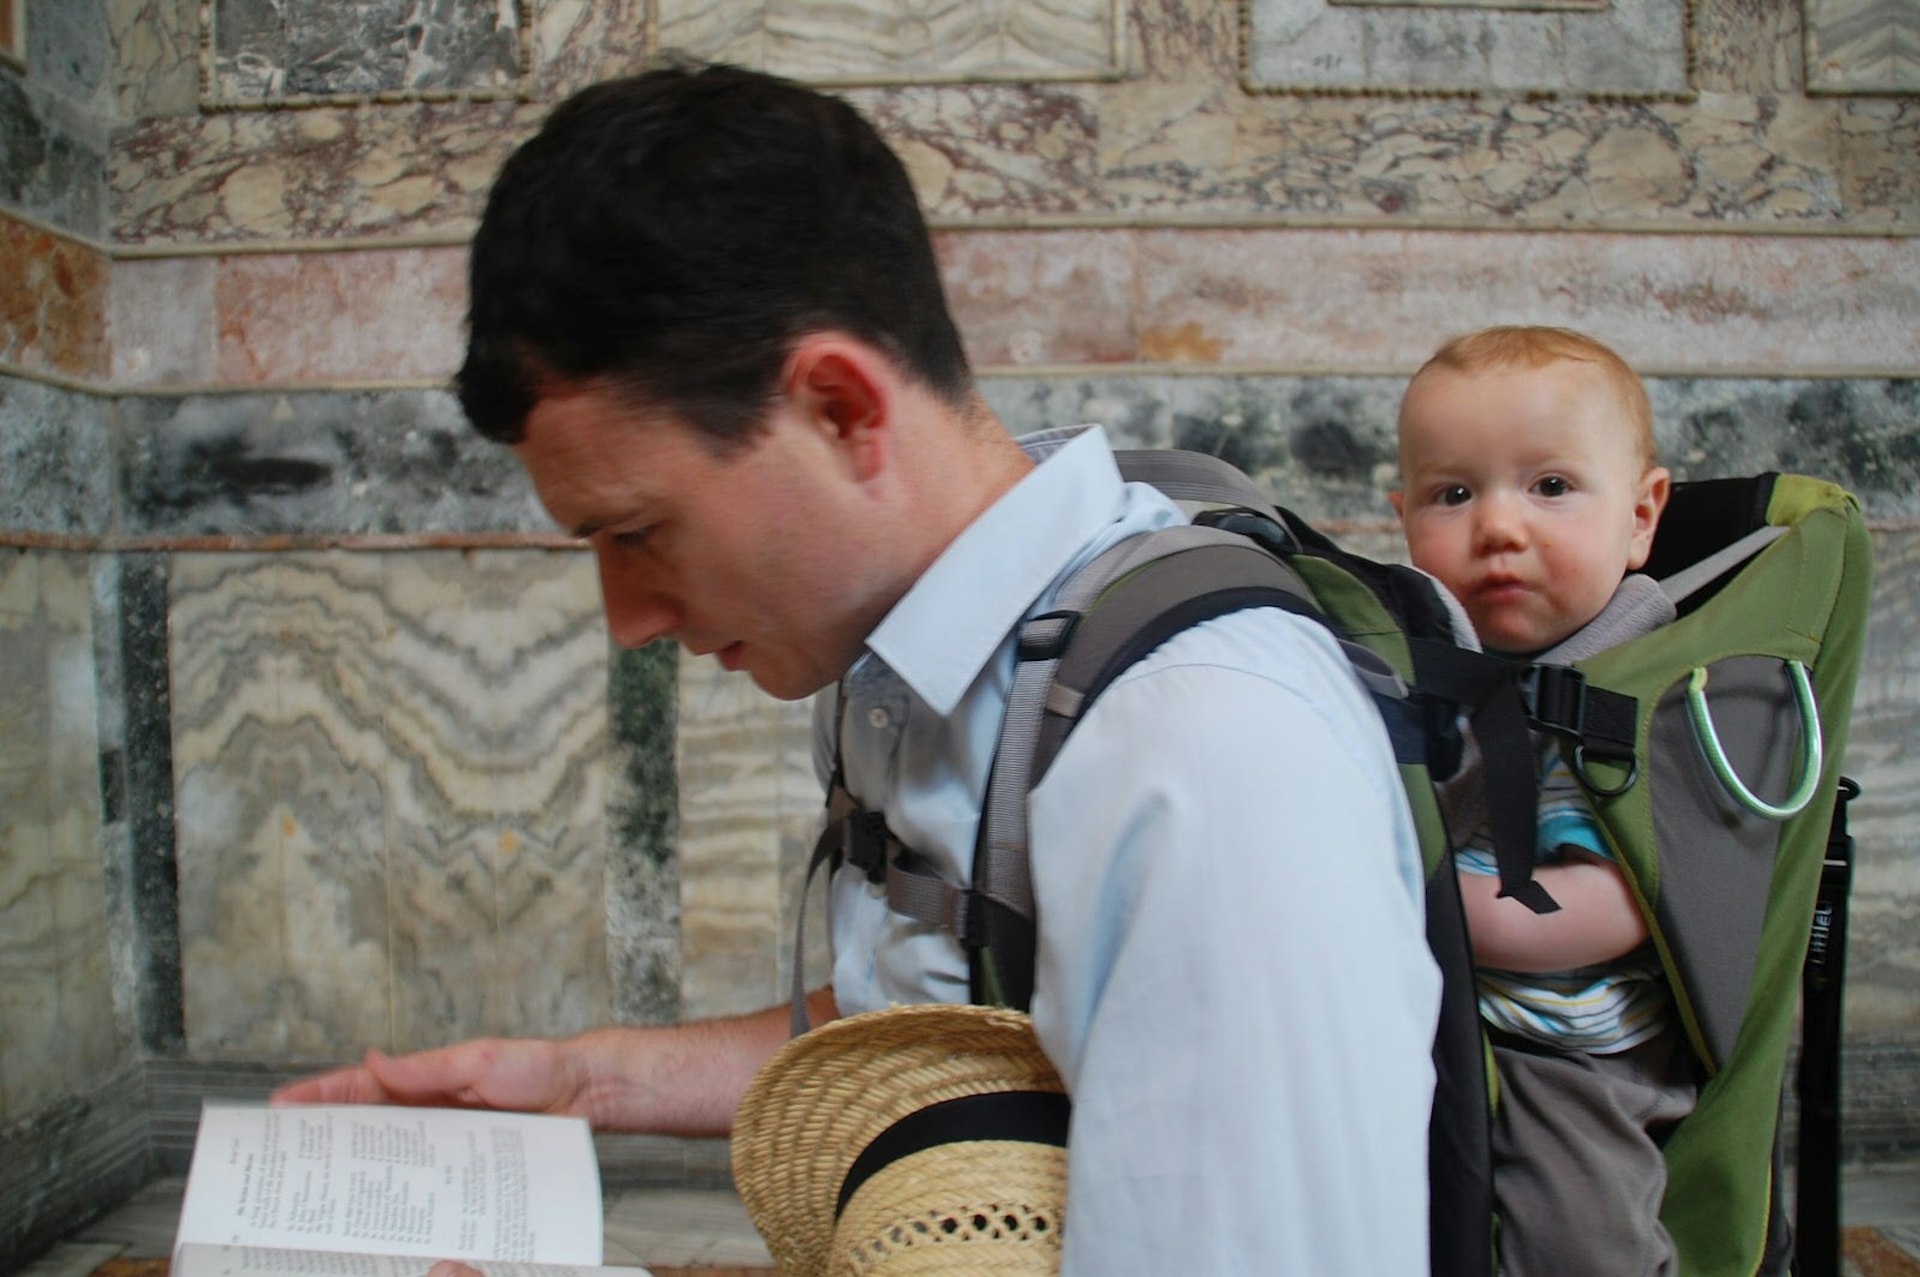 A father looks down at a guidebook within an Istanbul church while his infant child on his back looks inquisitively towards the camera